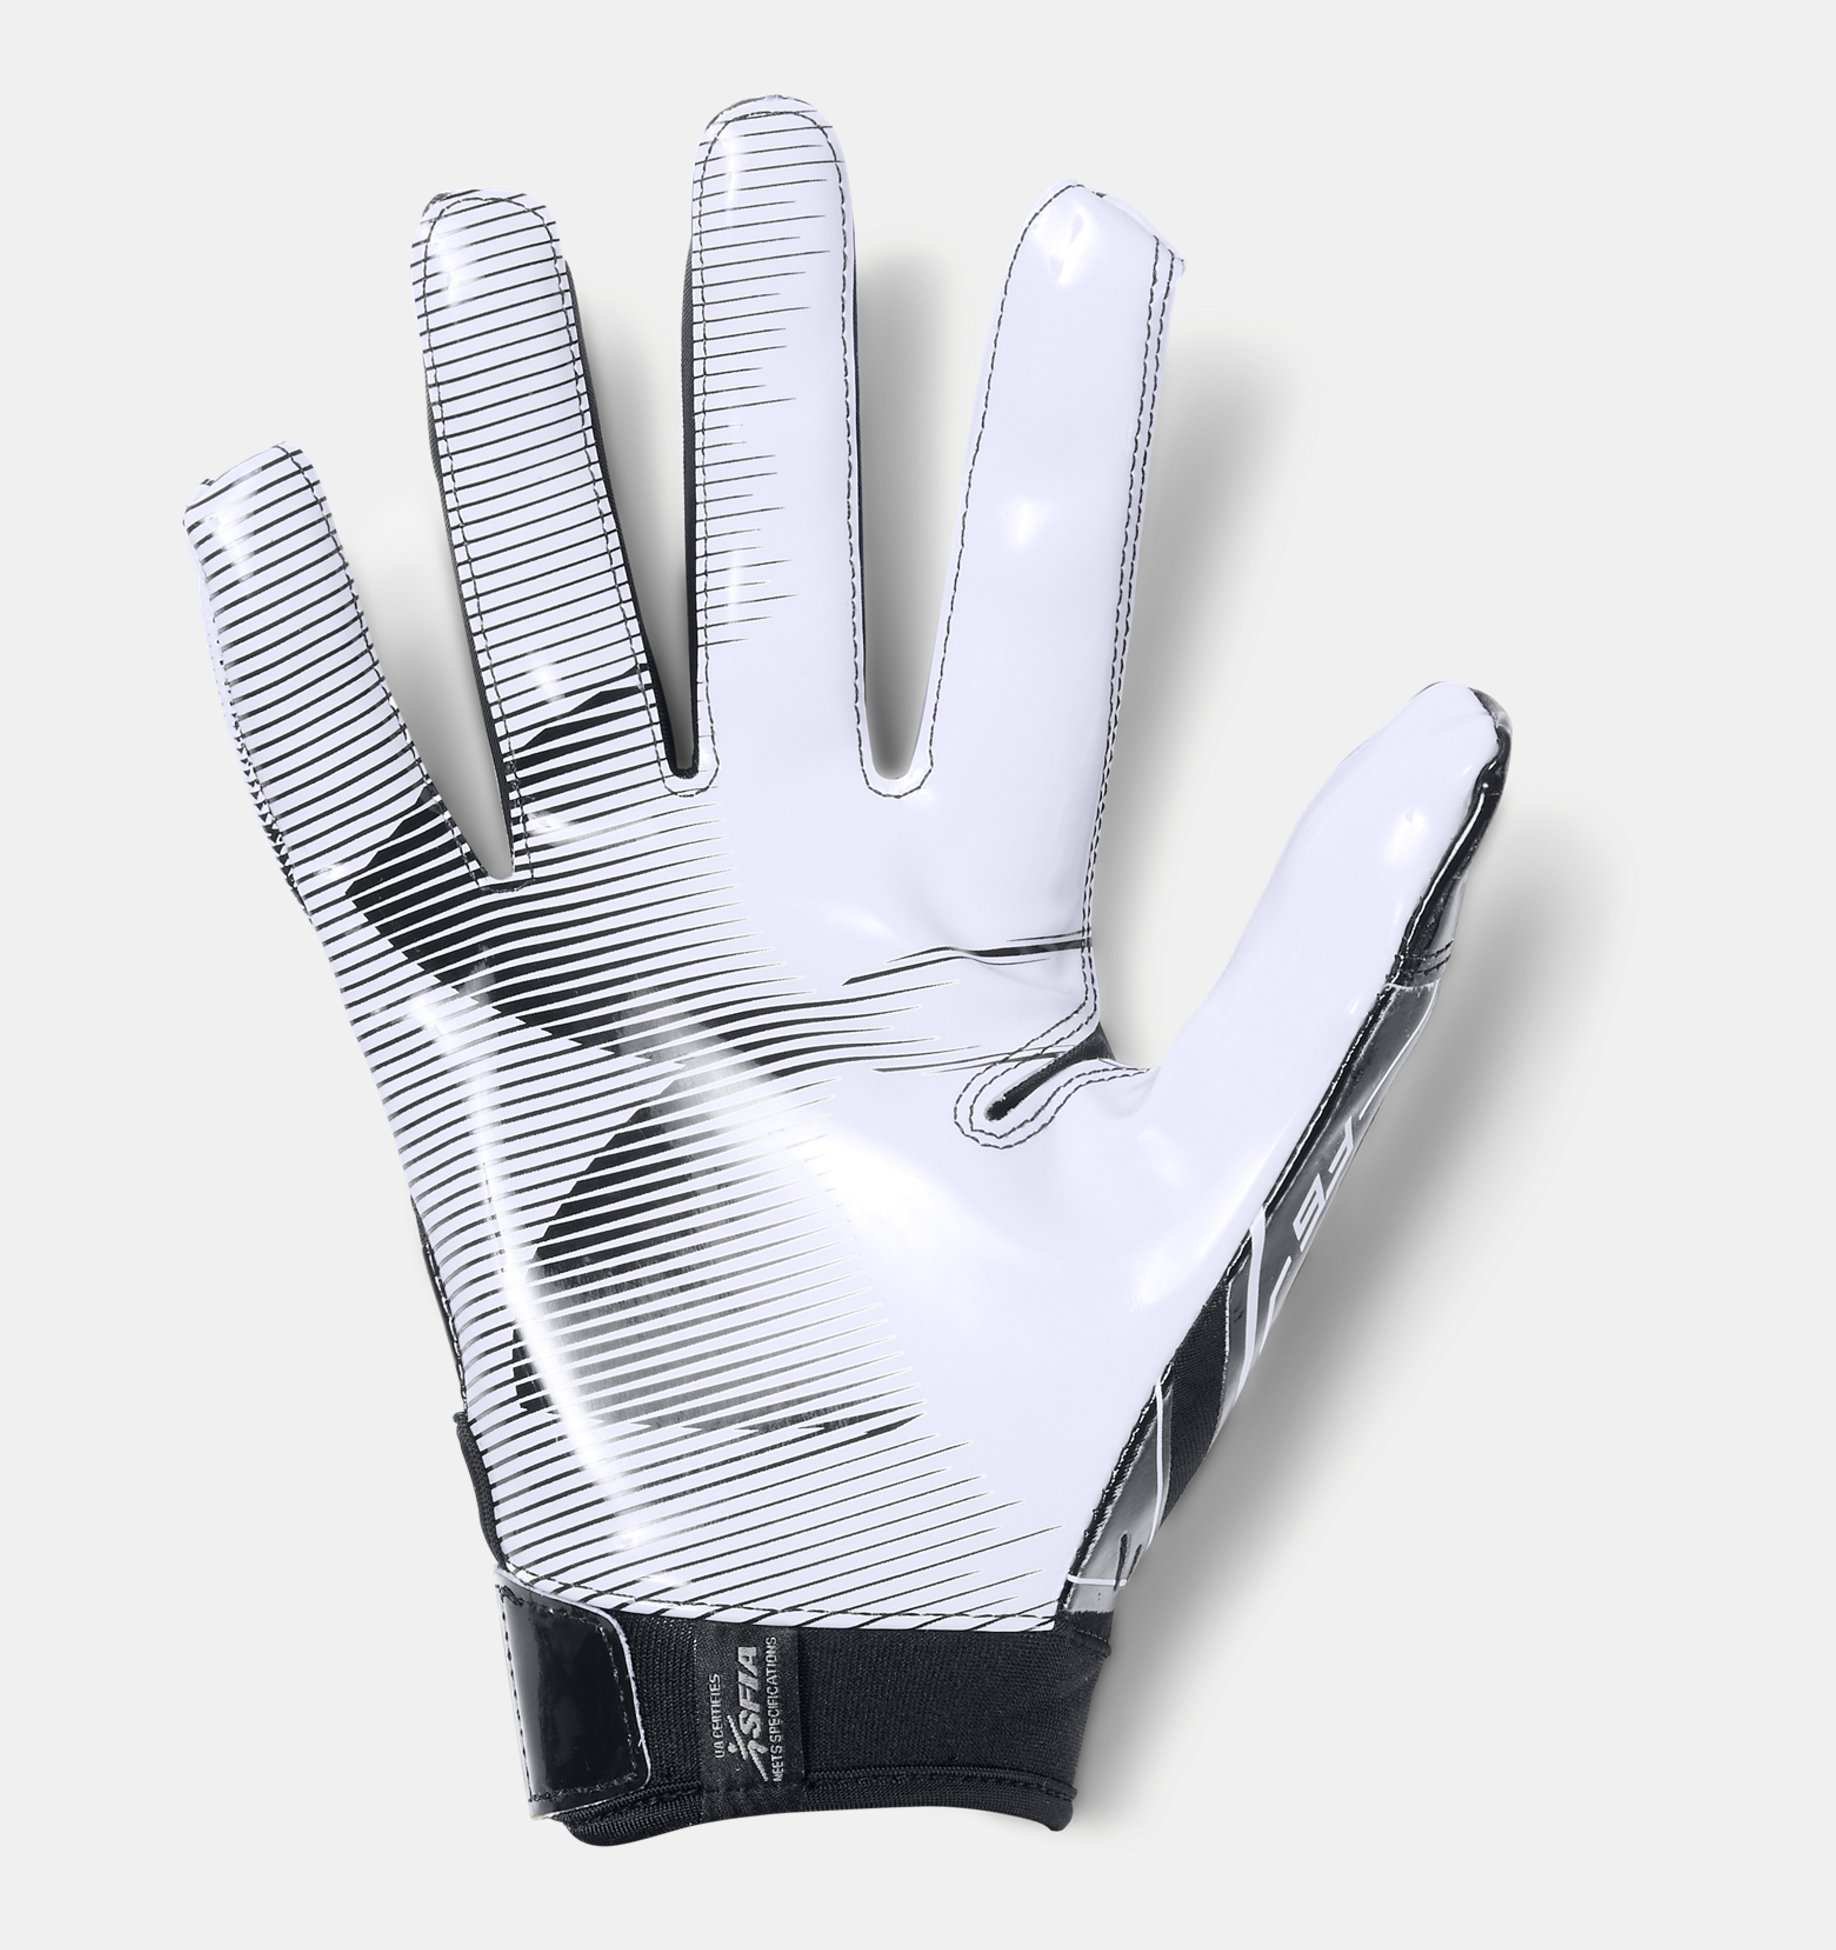 Under Armour UA F6 SKILL PLAYERS Adult Football Gloves Style 1315615-099 